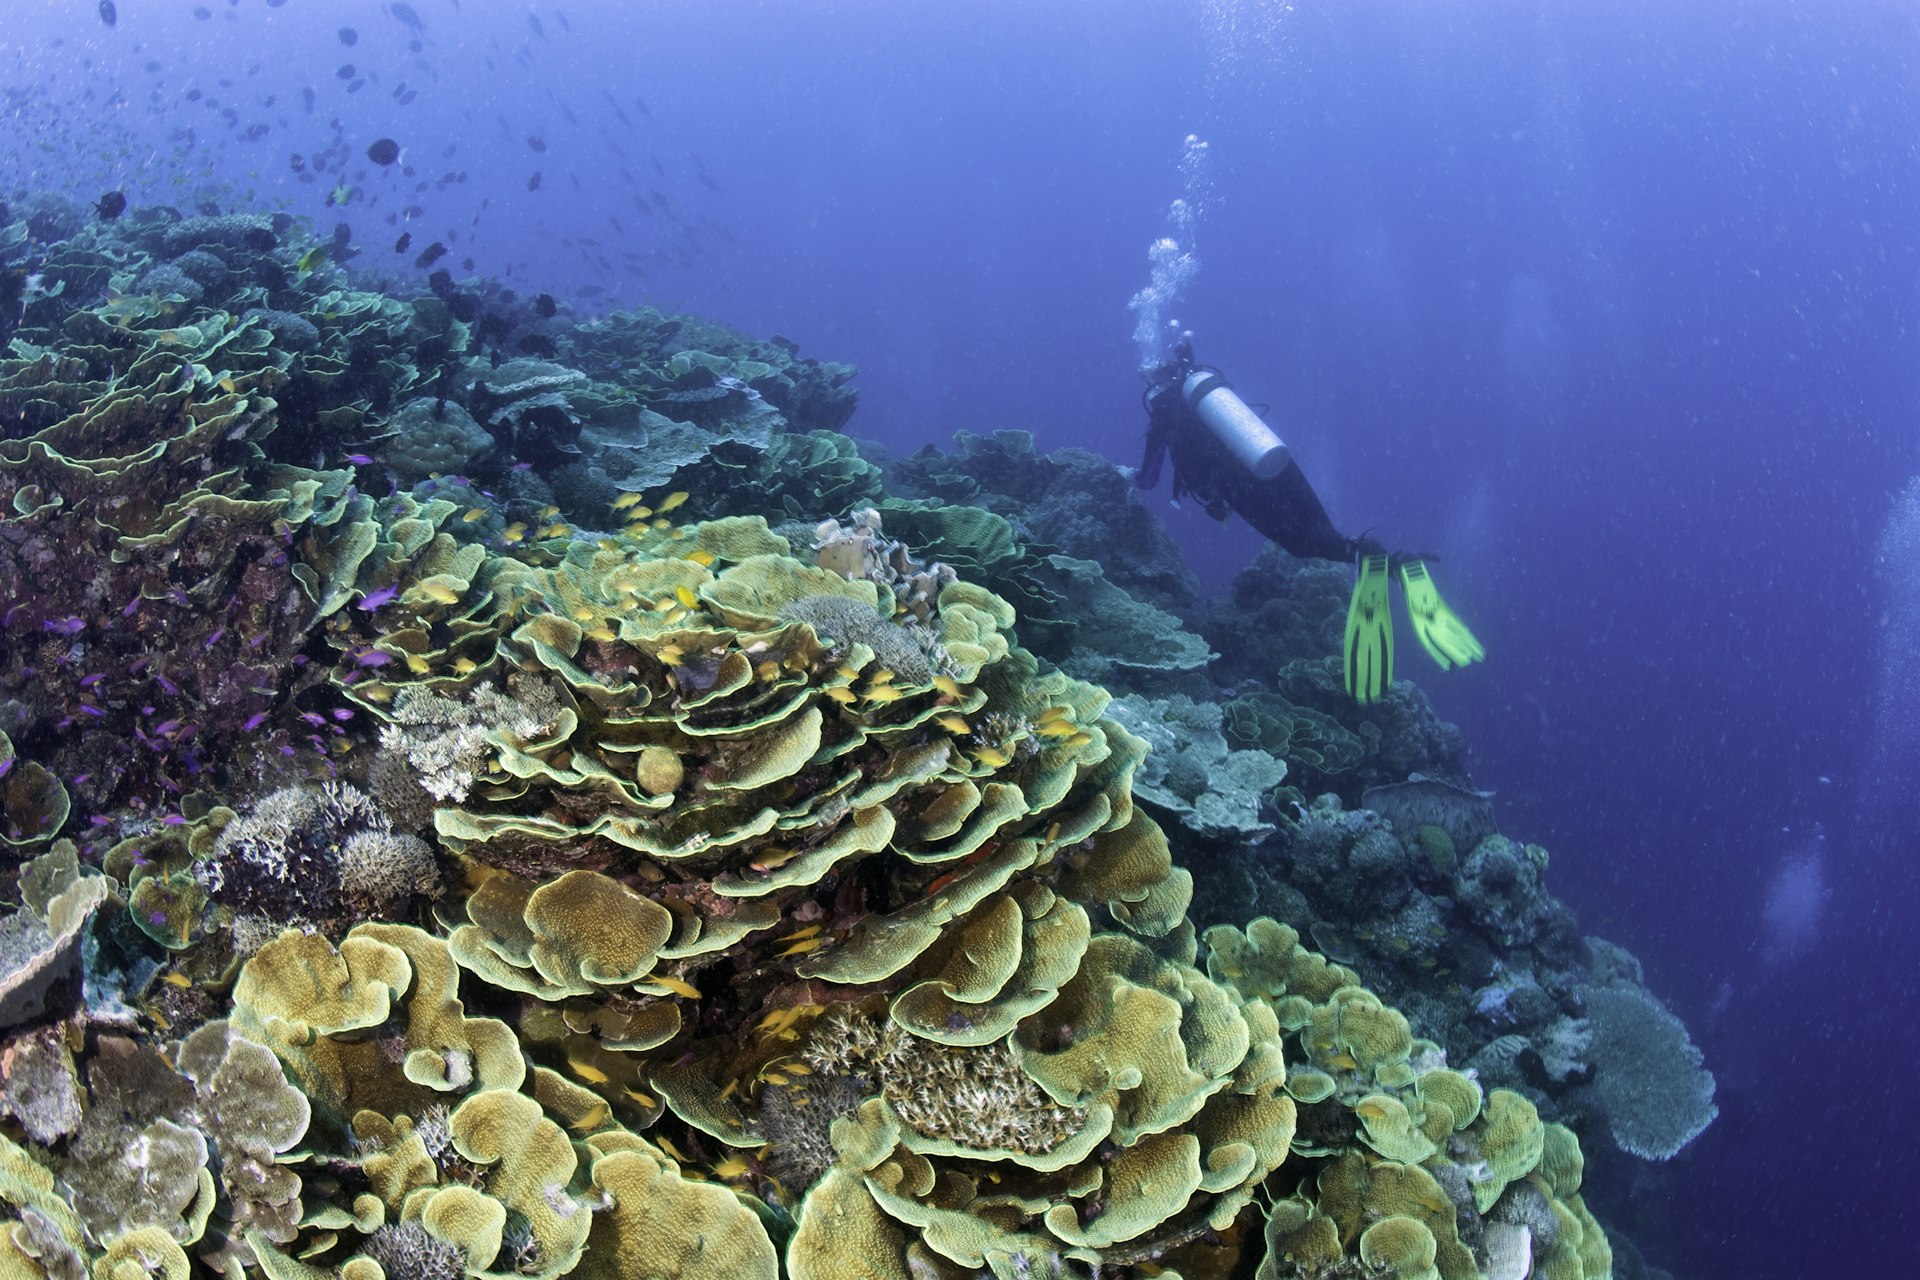 Features - Diver near coral reef